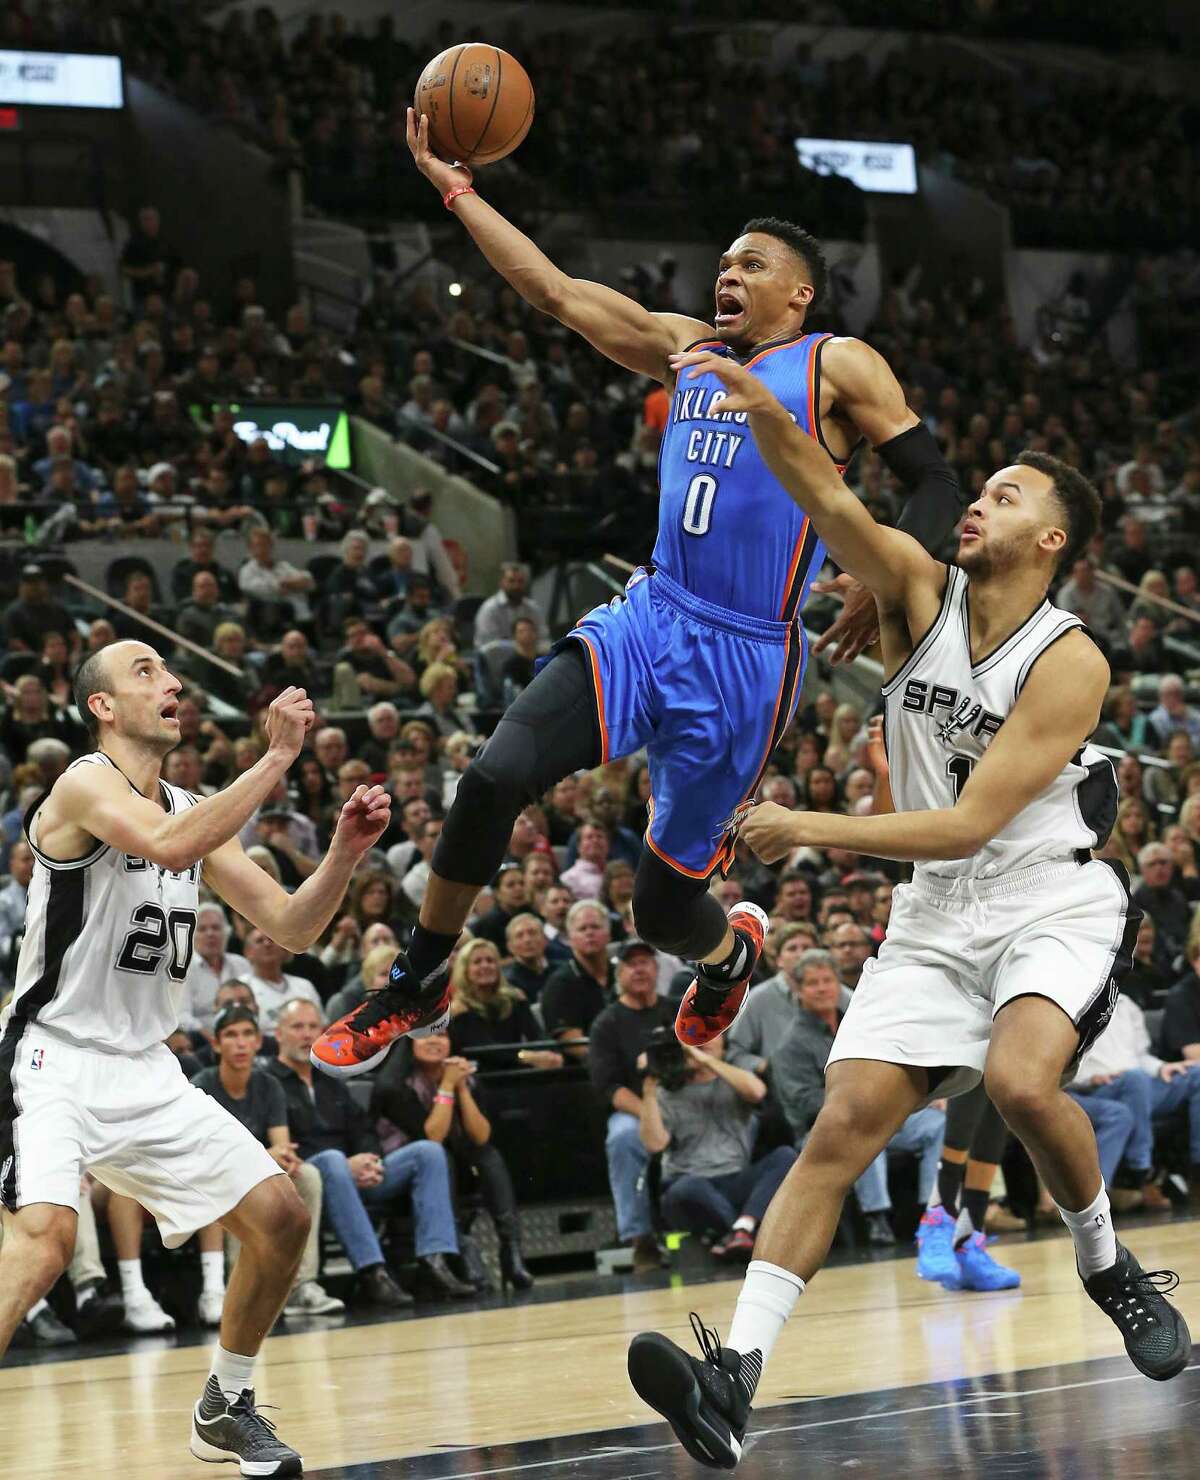 4. Stop the Westbrook pick-and-roll Russell Westbrook is a bundle of boundless energy, a guard noted for his supreme athleticism and rim-ripping dunks. He's been at his best this series shredding the Spurs in the pick-and-roll, particularly with Adams setting the screen. The Spurs have been cooked by this combination throughout the series. Even Duncan, an Einstein-level defender, has looked helpless against it. If the Spurs can't disrupt this play, or at least throw Westbrook off his rhythm, it's going to result in too many easy buckets for OKC.